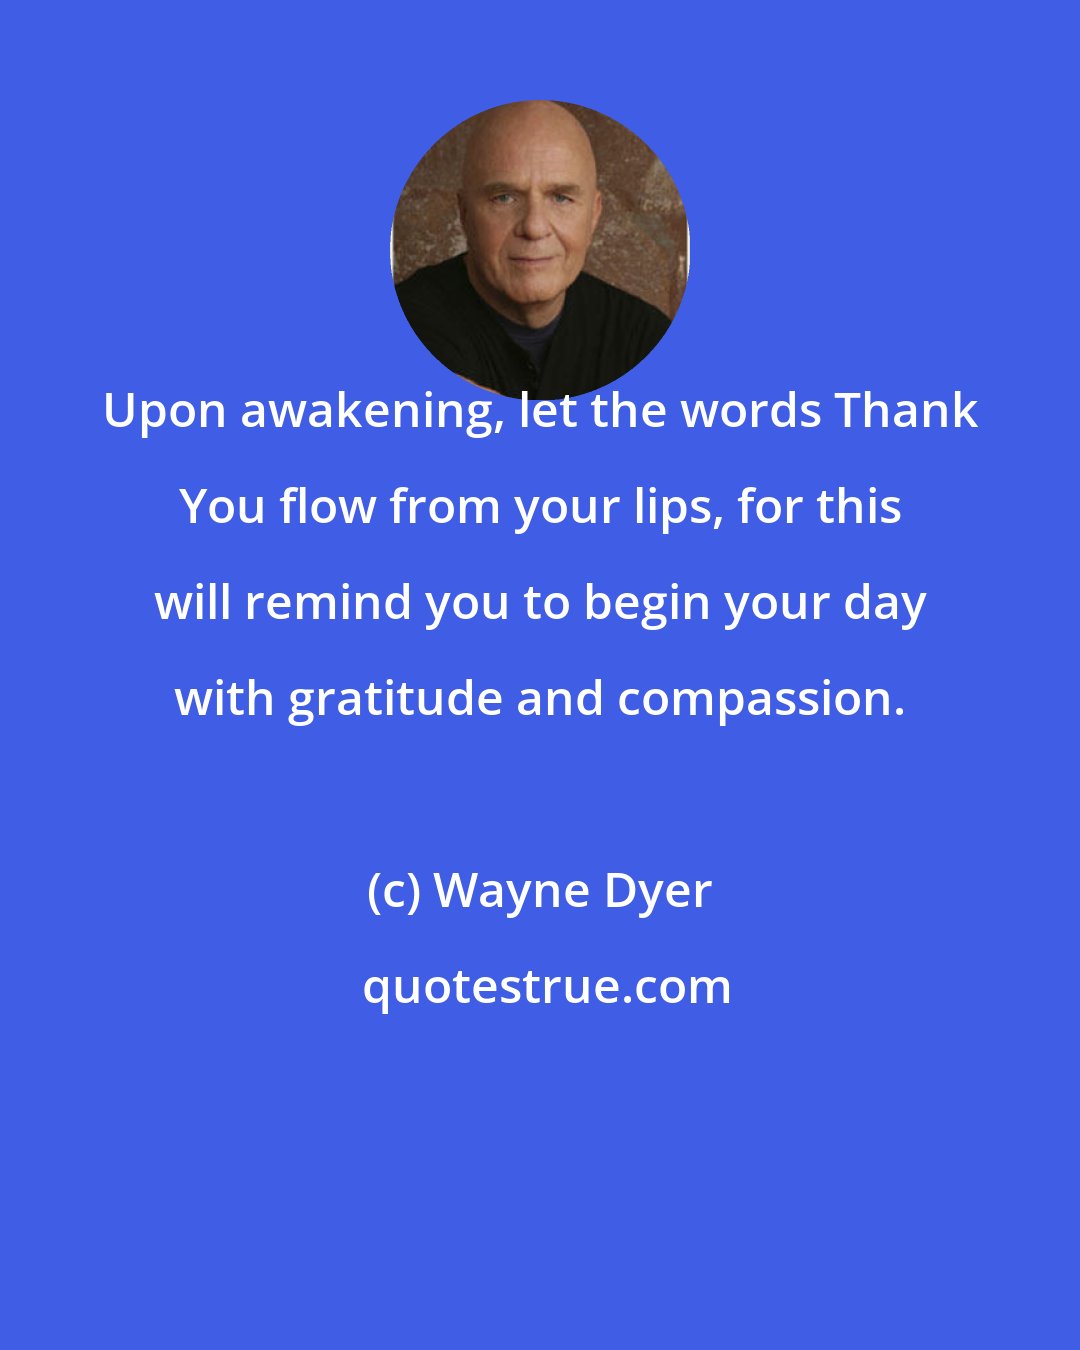 Wayne Dyer: Upon awakening, let the words Thank You flow from your lips, for this will remind you to begin your day with gratitude and compassion.